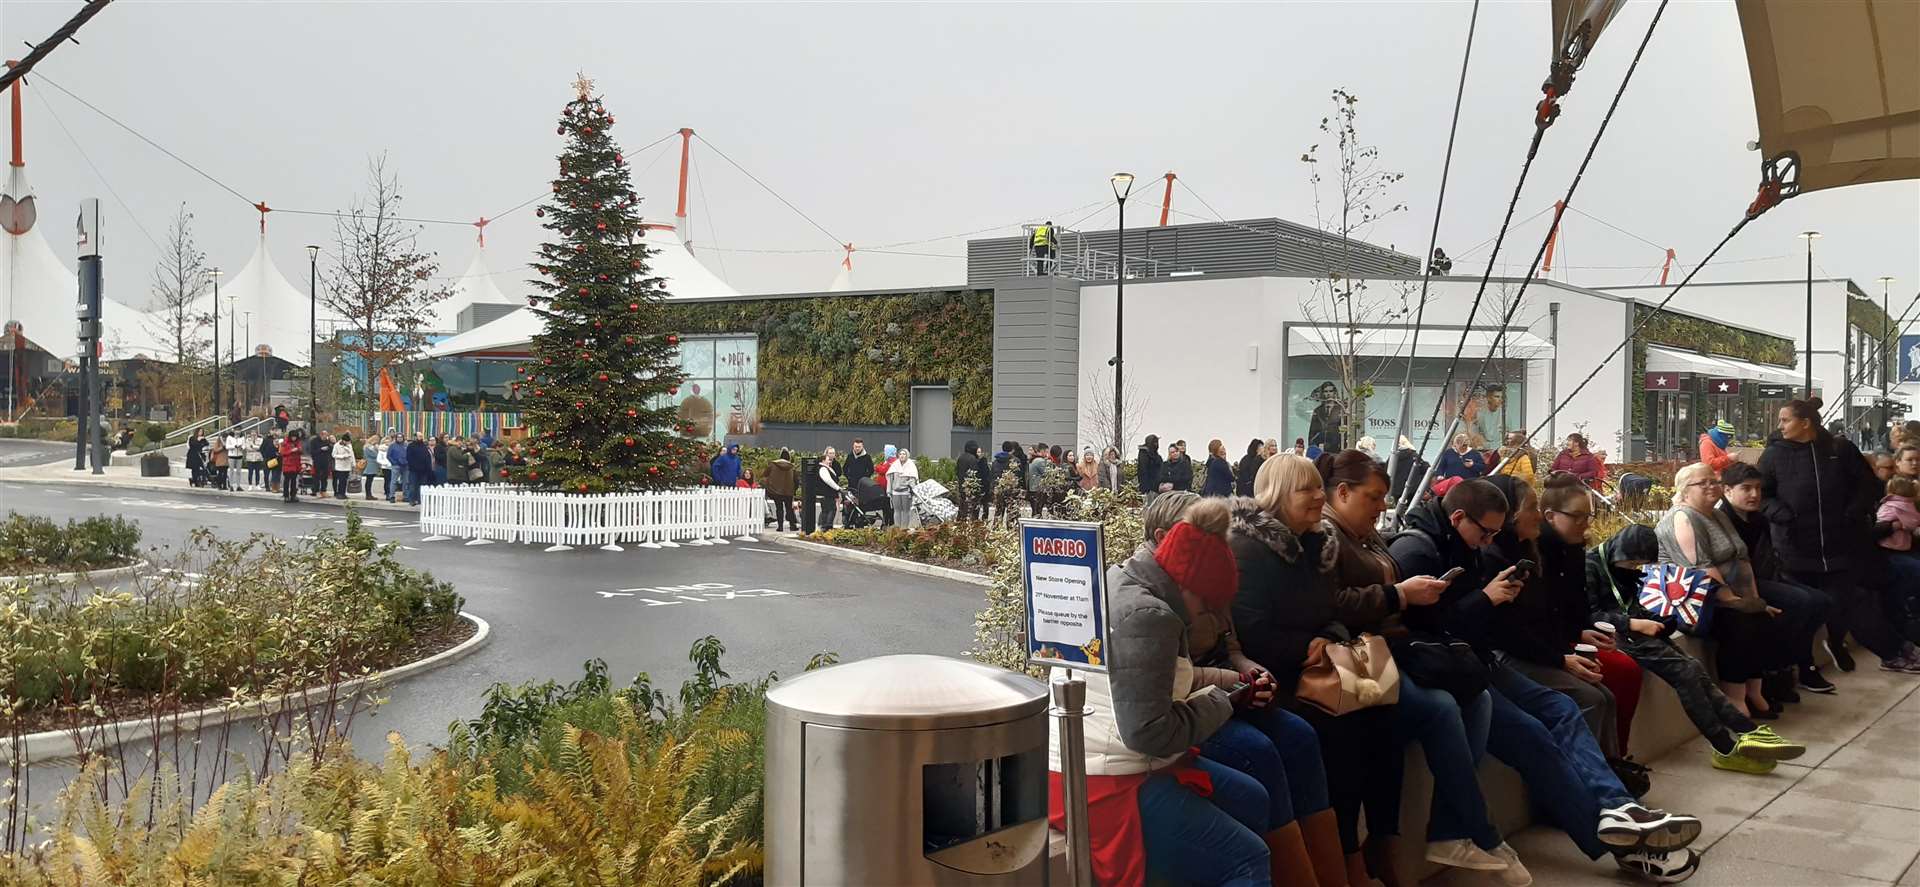 Huge queues have formed ahead of the 11am opening of the new Haribo store in the Ashford Designer Outlet